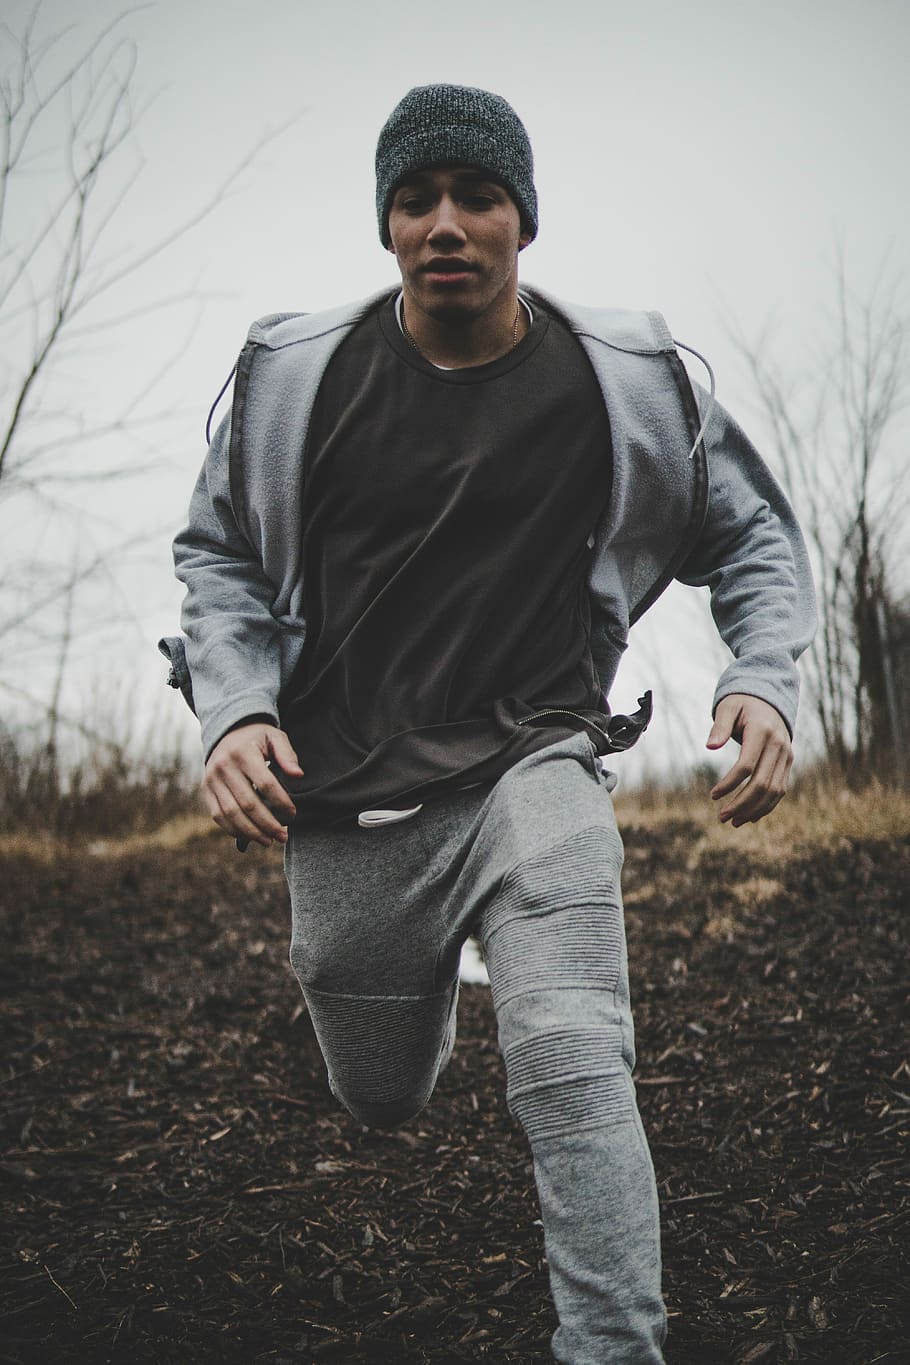 man wearing black shirt and gray jacket with pants while running into plain field, man running on brown soil near bare trees, HD wallpaper